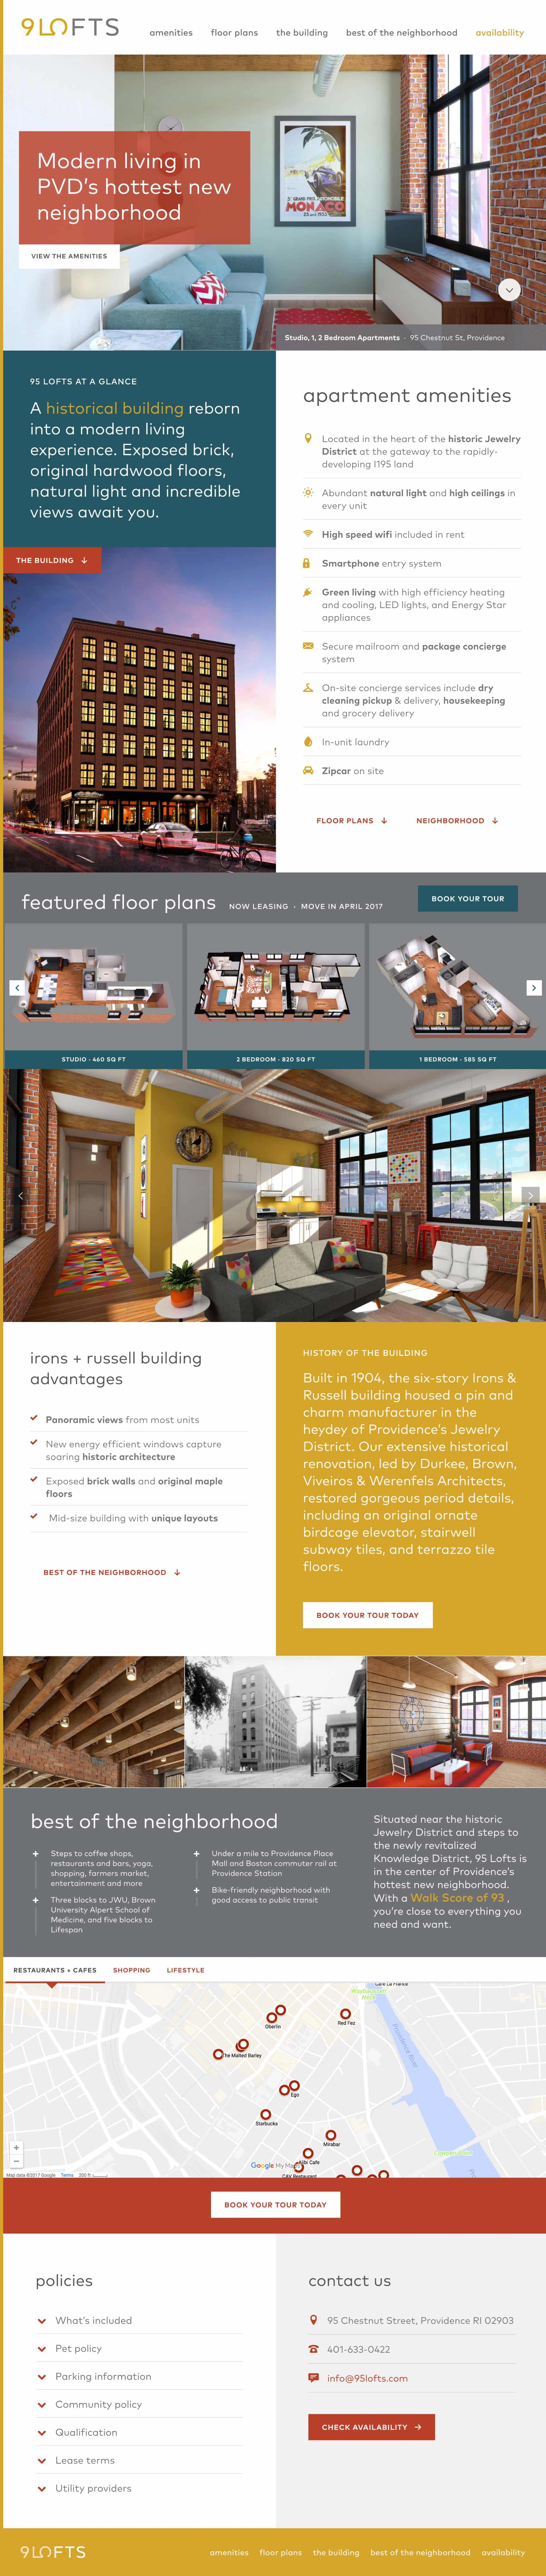 web design and development for Providence real estate company